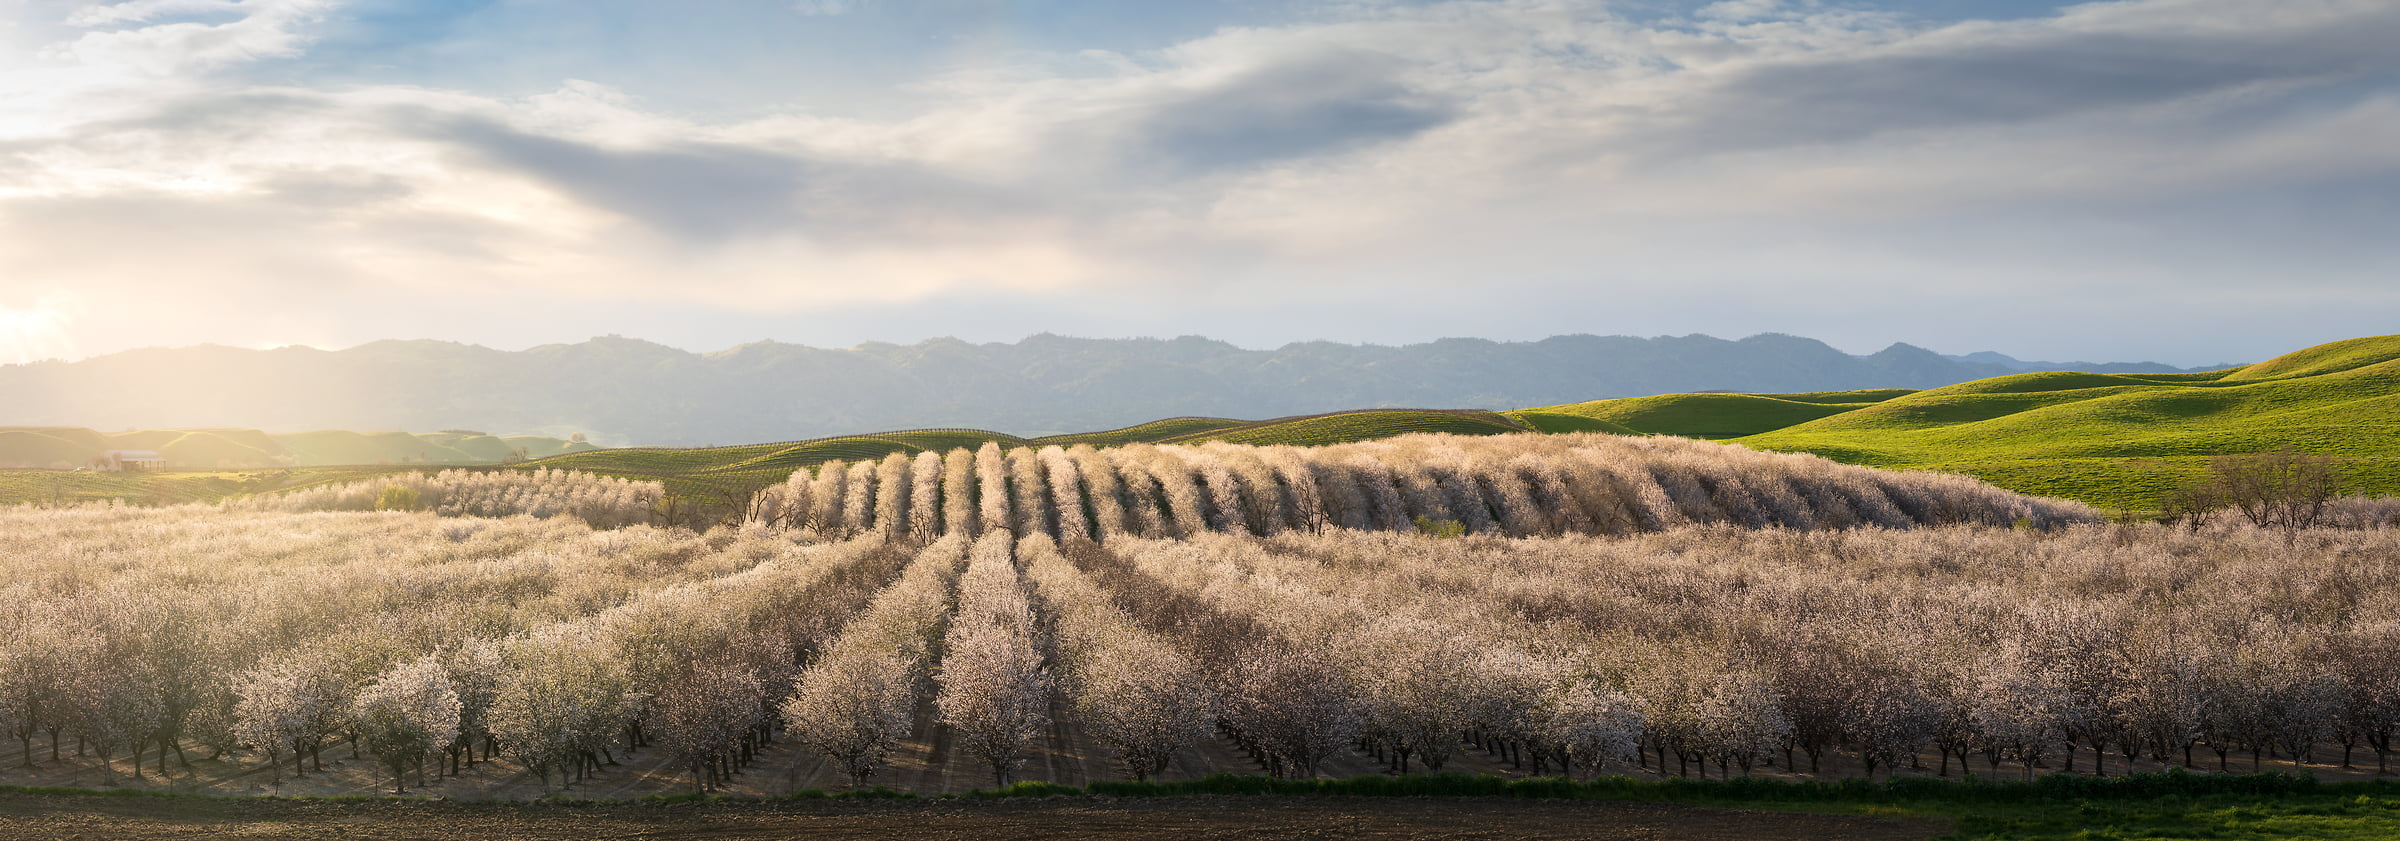 246 megapixels! A very high resolution, large-format VAST photo print of a field in Central Valley, California; landscape photograph created by Jeff Lewis in Central Valley, California.